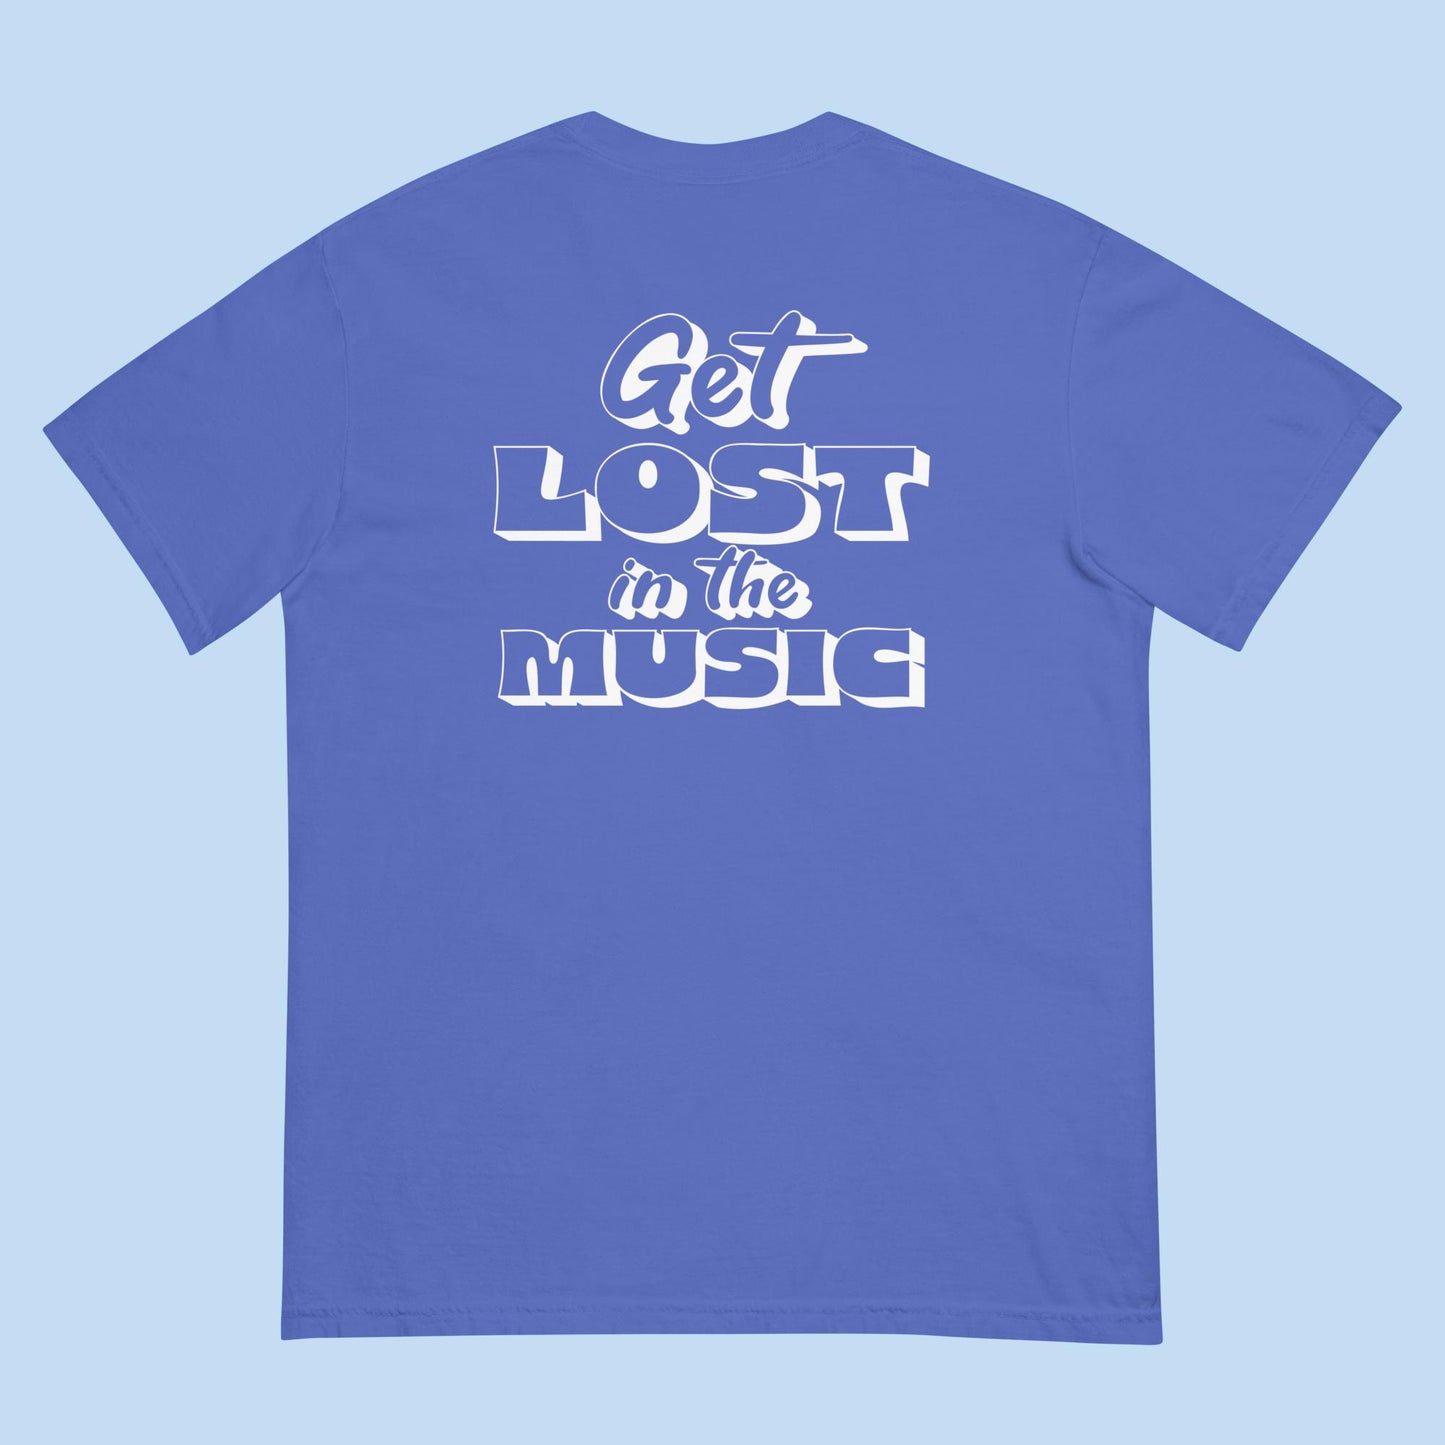 Get Lost in the Music Unisex Garment-Dyed Heavyweight T-Shirt